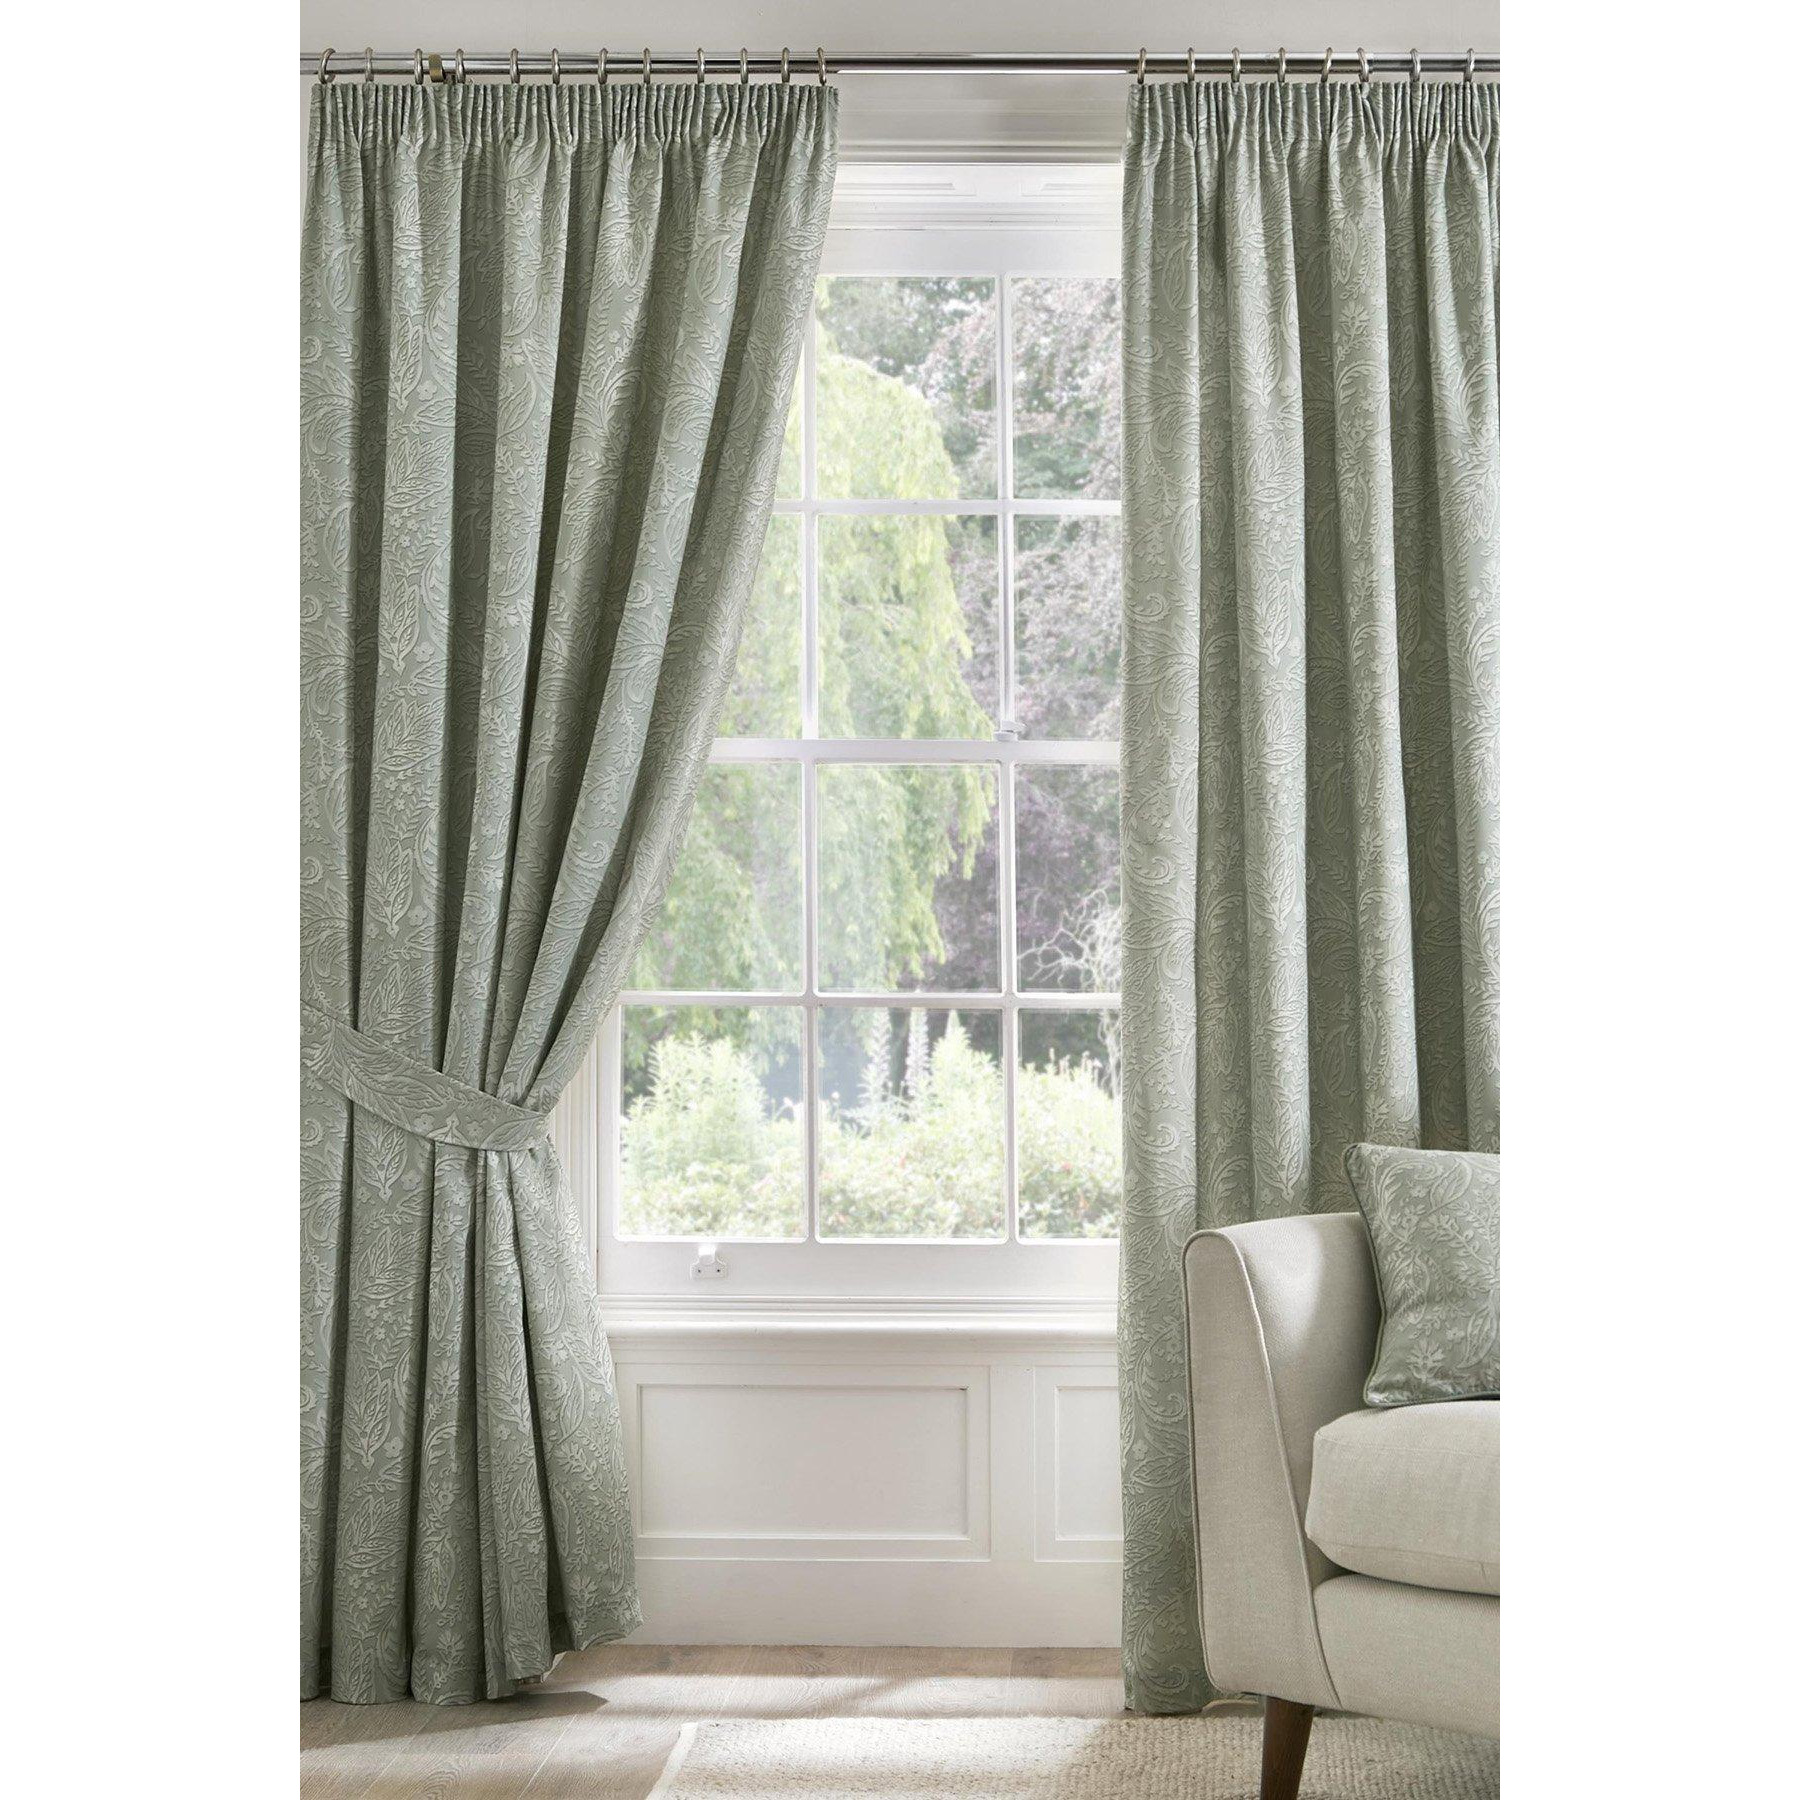 'Aveline' 100% Cotton Pair of Pencil Pleat Curtains With Tie-Backs - image 1